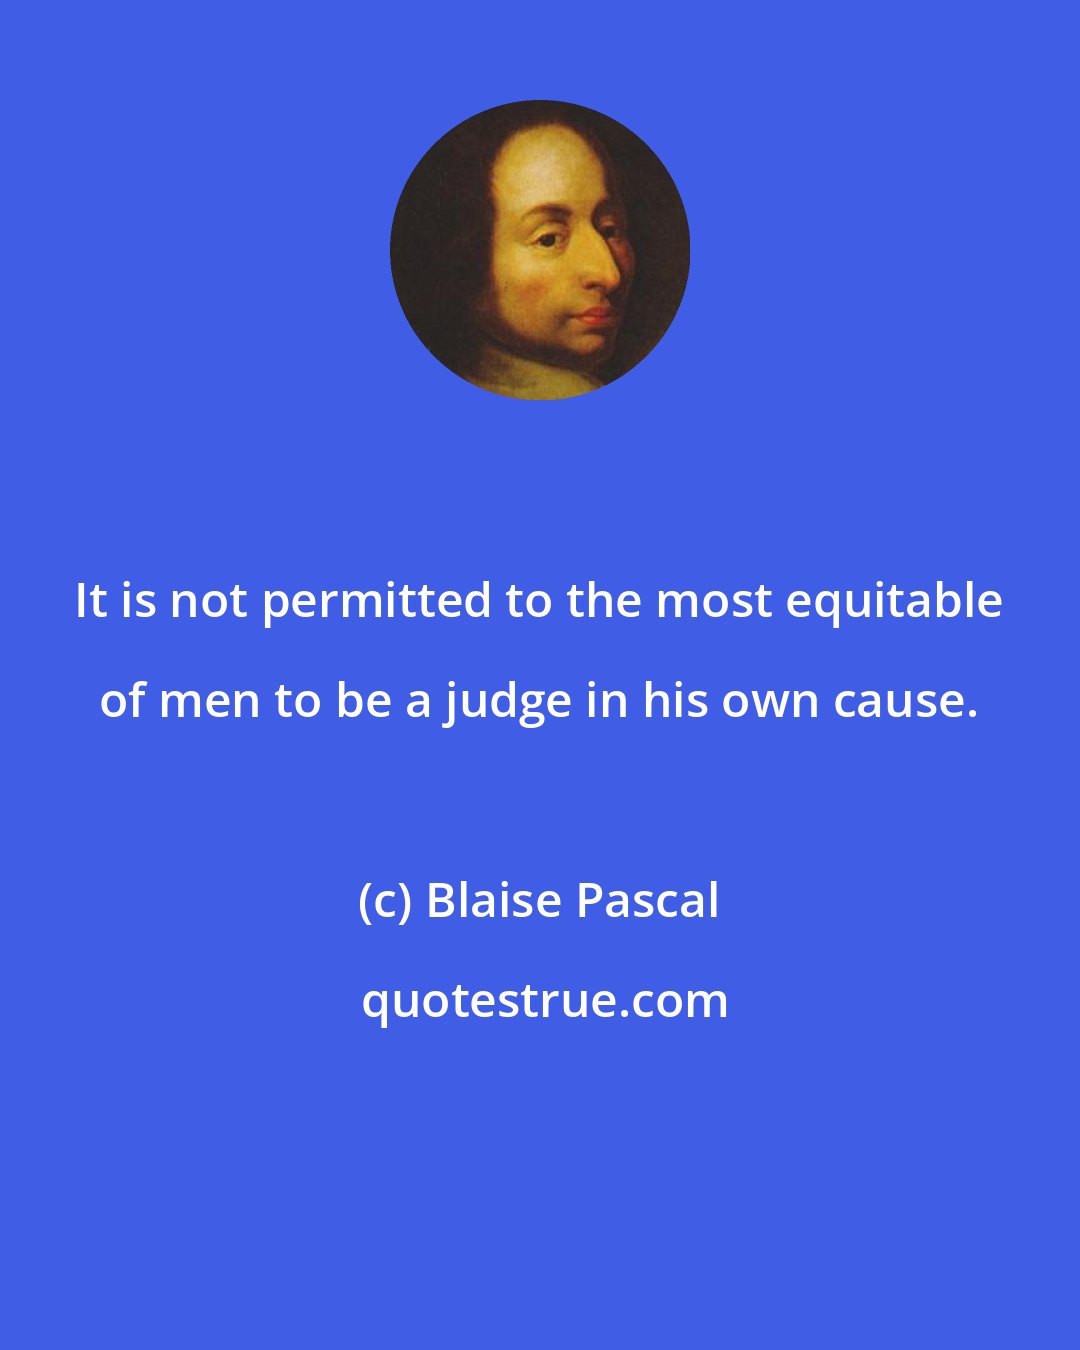 Blaise Pascal: It is not permitted to the most equitable of men to be a judge in his own cause.